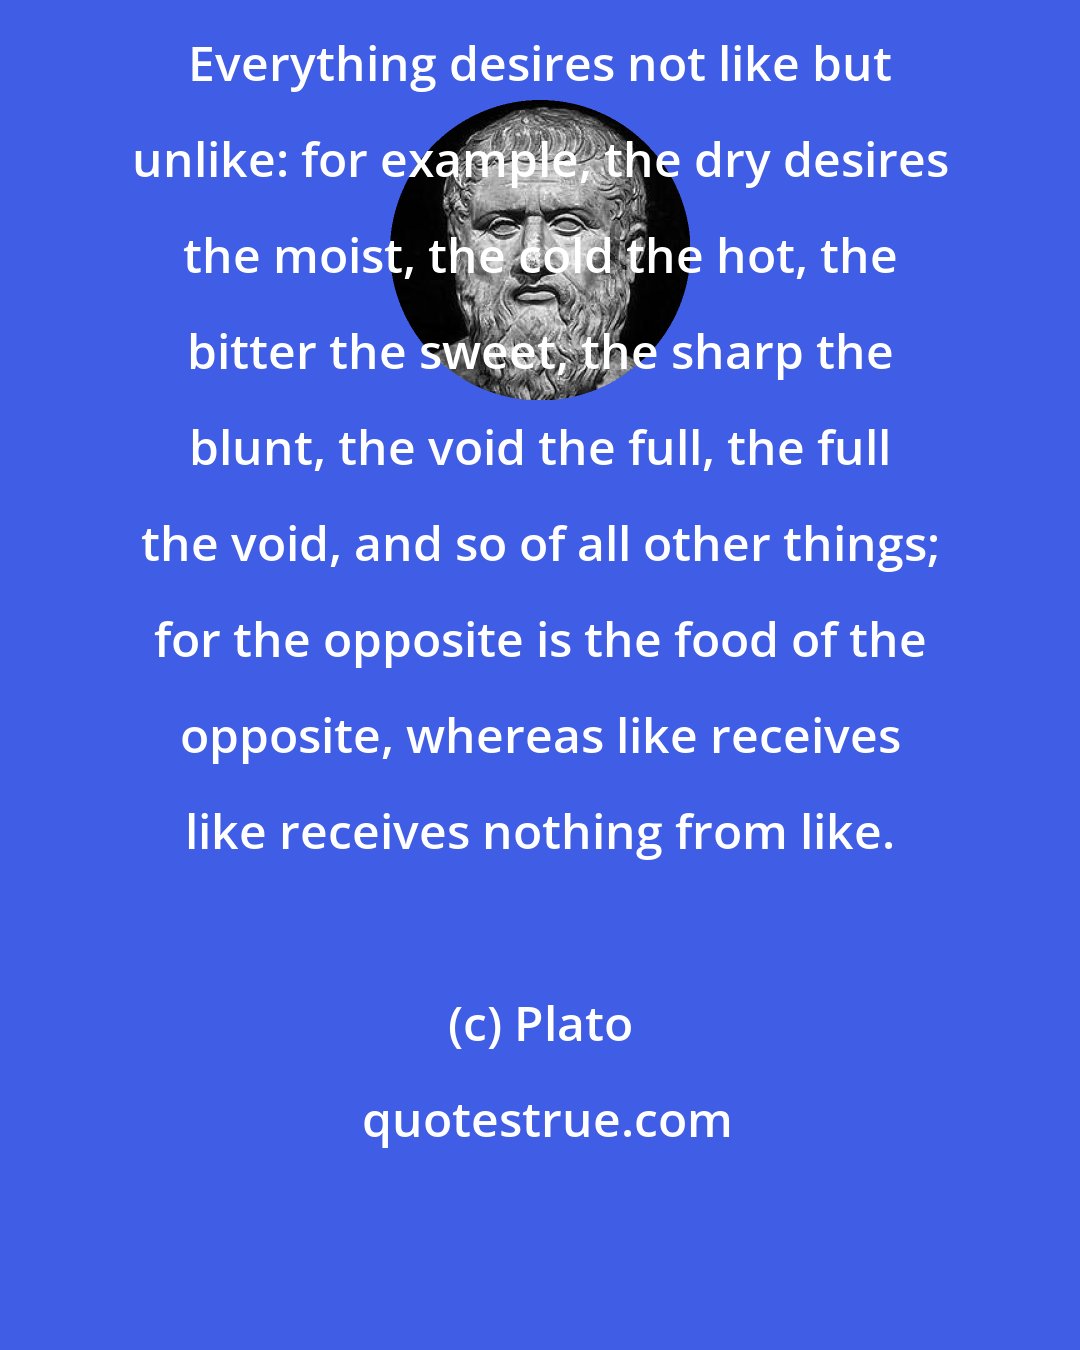 Plato: Everything desires not like but unlike: for example, the dry desires the moist, the cold the hot, the bitter the sweet, the sharp the blunt, the void the full, the full the void, and so of all other things; for the opposite is the food of the opposite, whereas like receives like receives nothing from like.